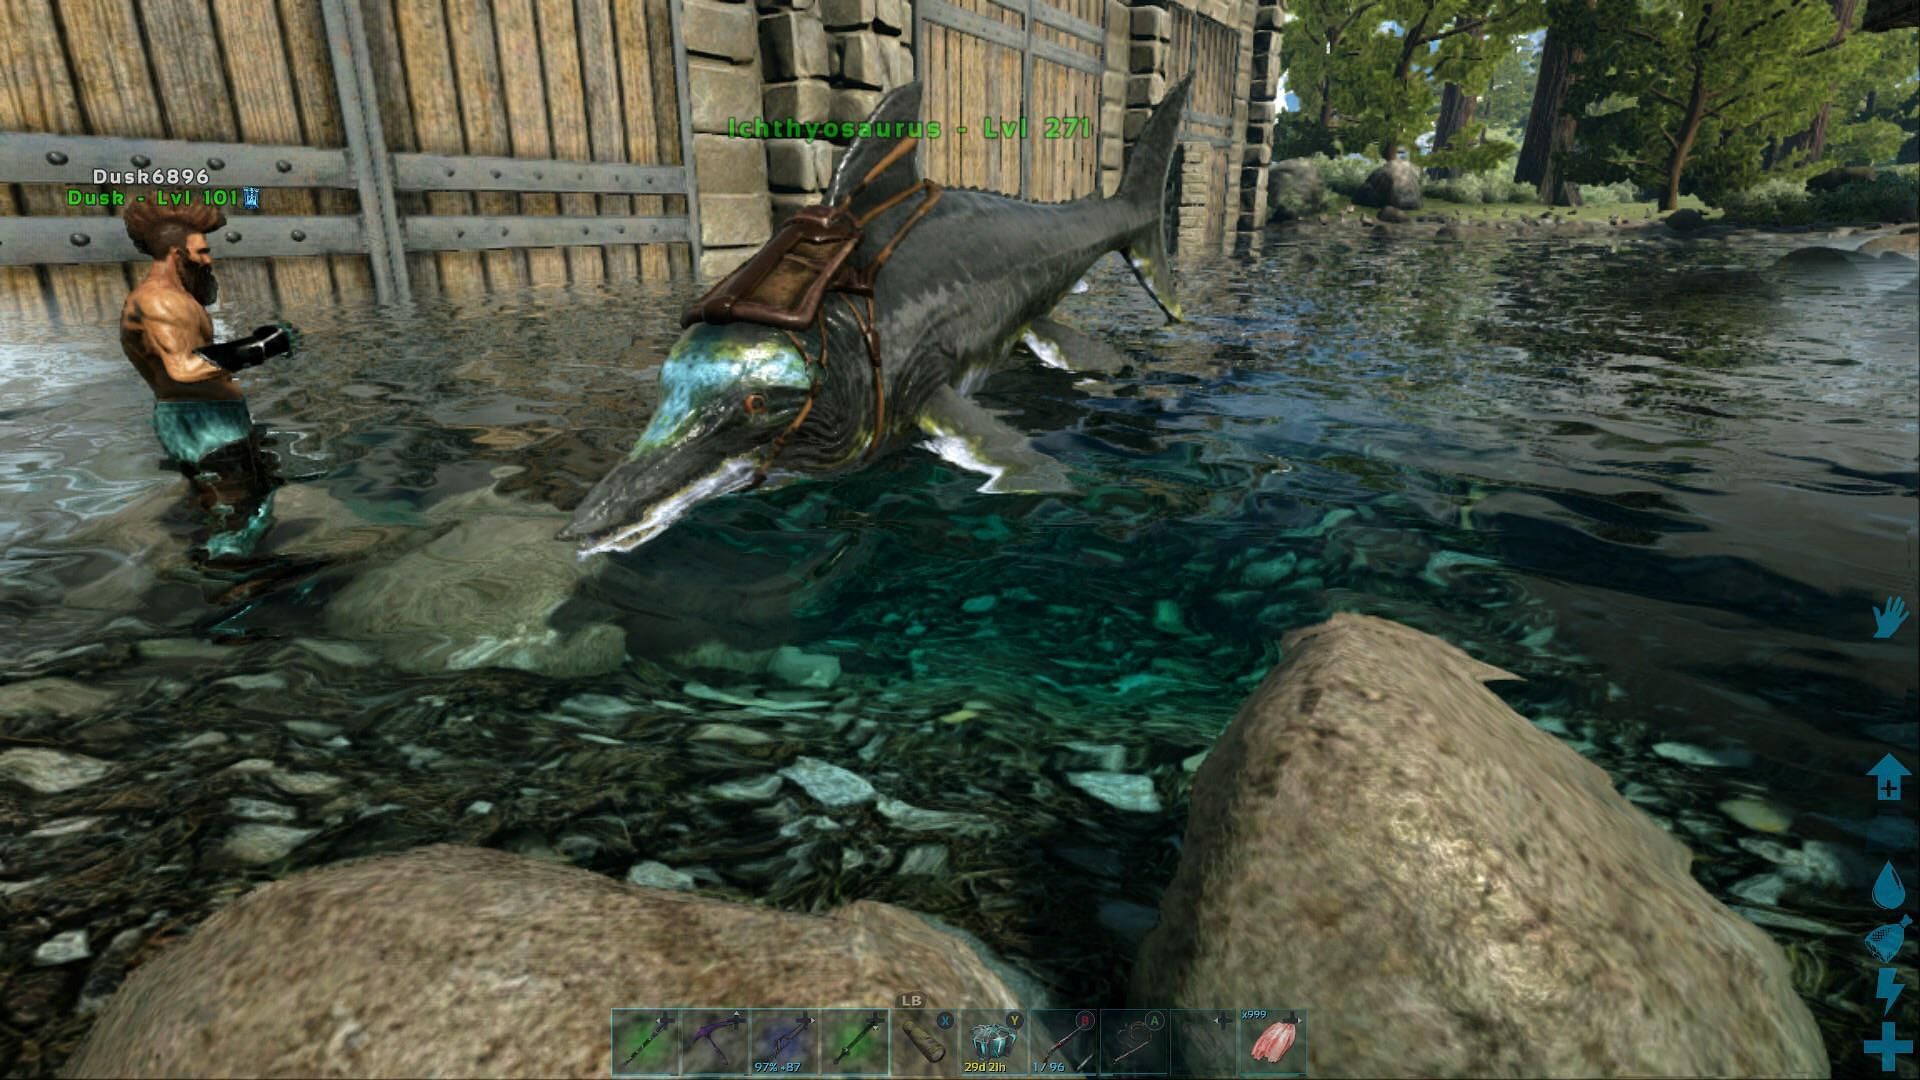 An Ichthyosaurus in a base in Ark Survival Ascended